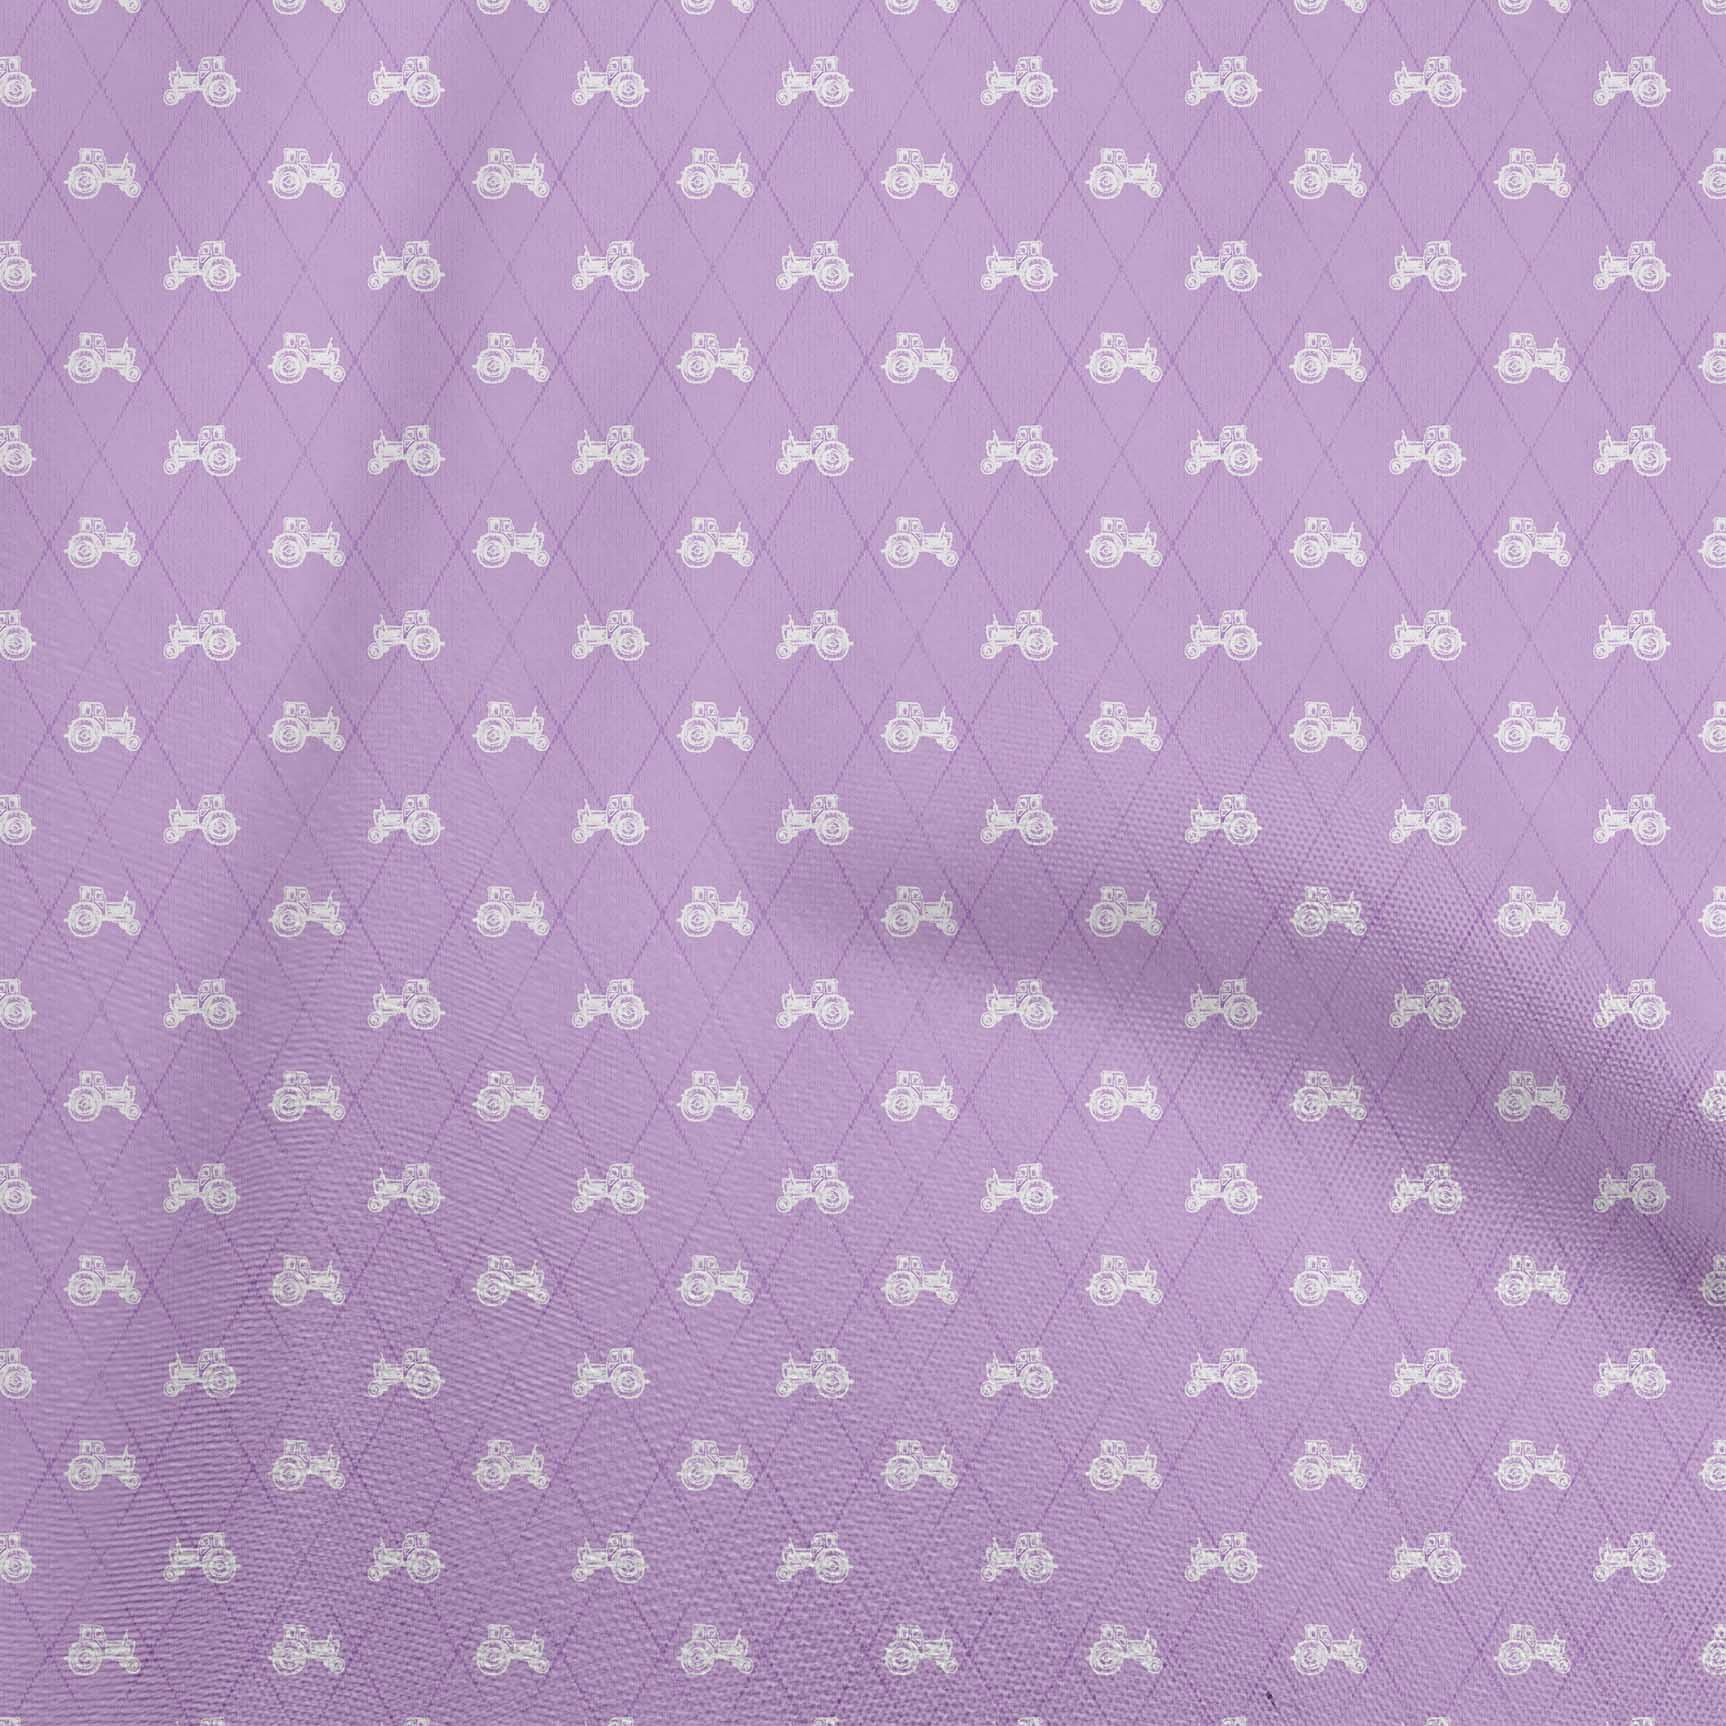 Quilting Crafts Dressmaking And JERSEY Stretch COTTON FABRiC Huppy Lilac Birds 